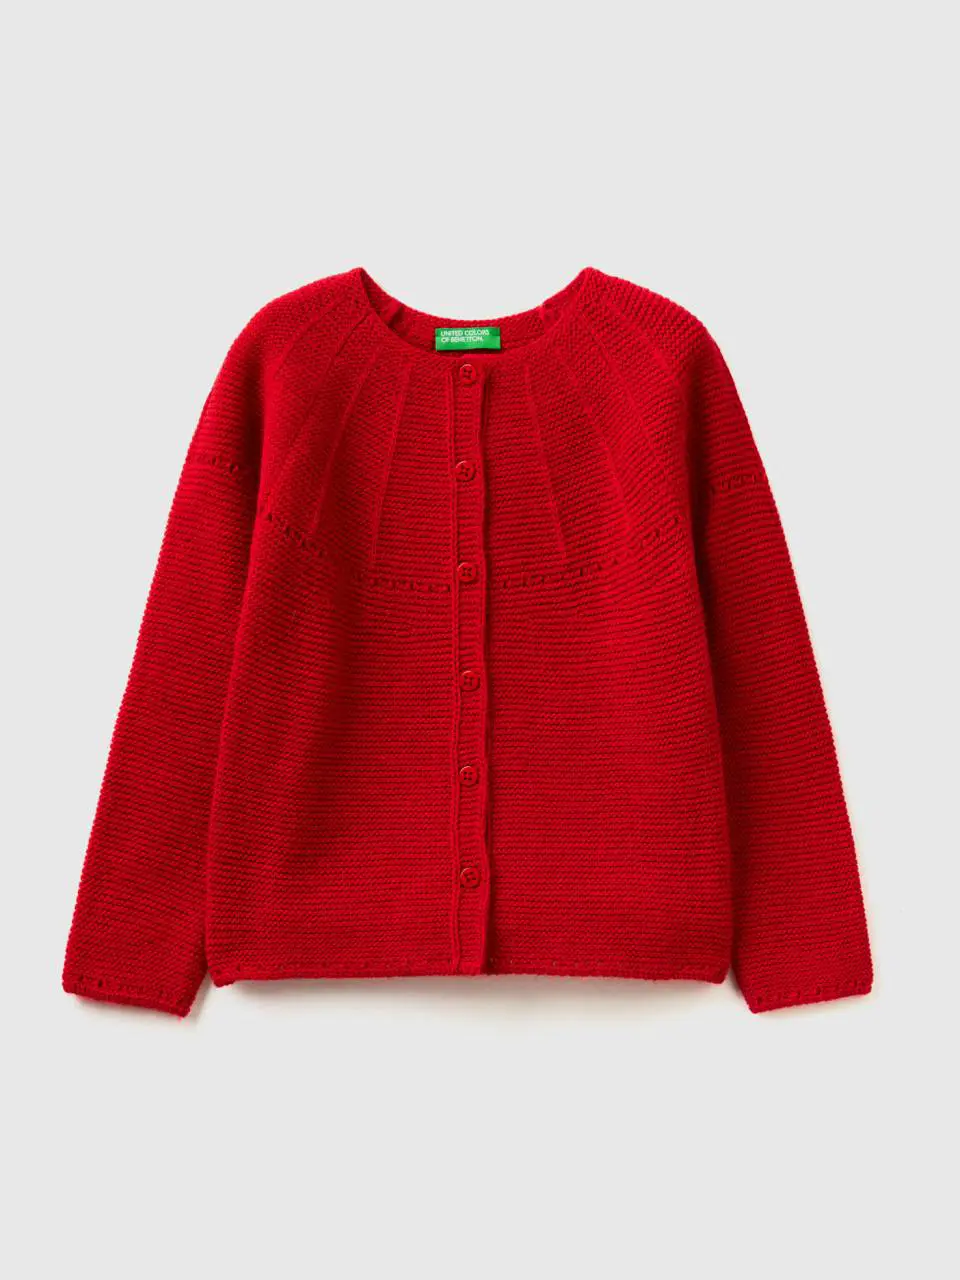 Benetton cardigan with perforated details. 1